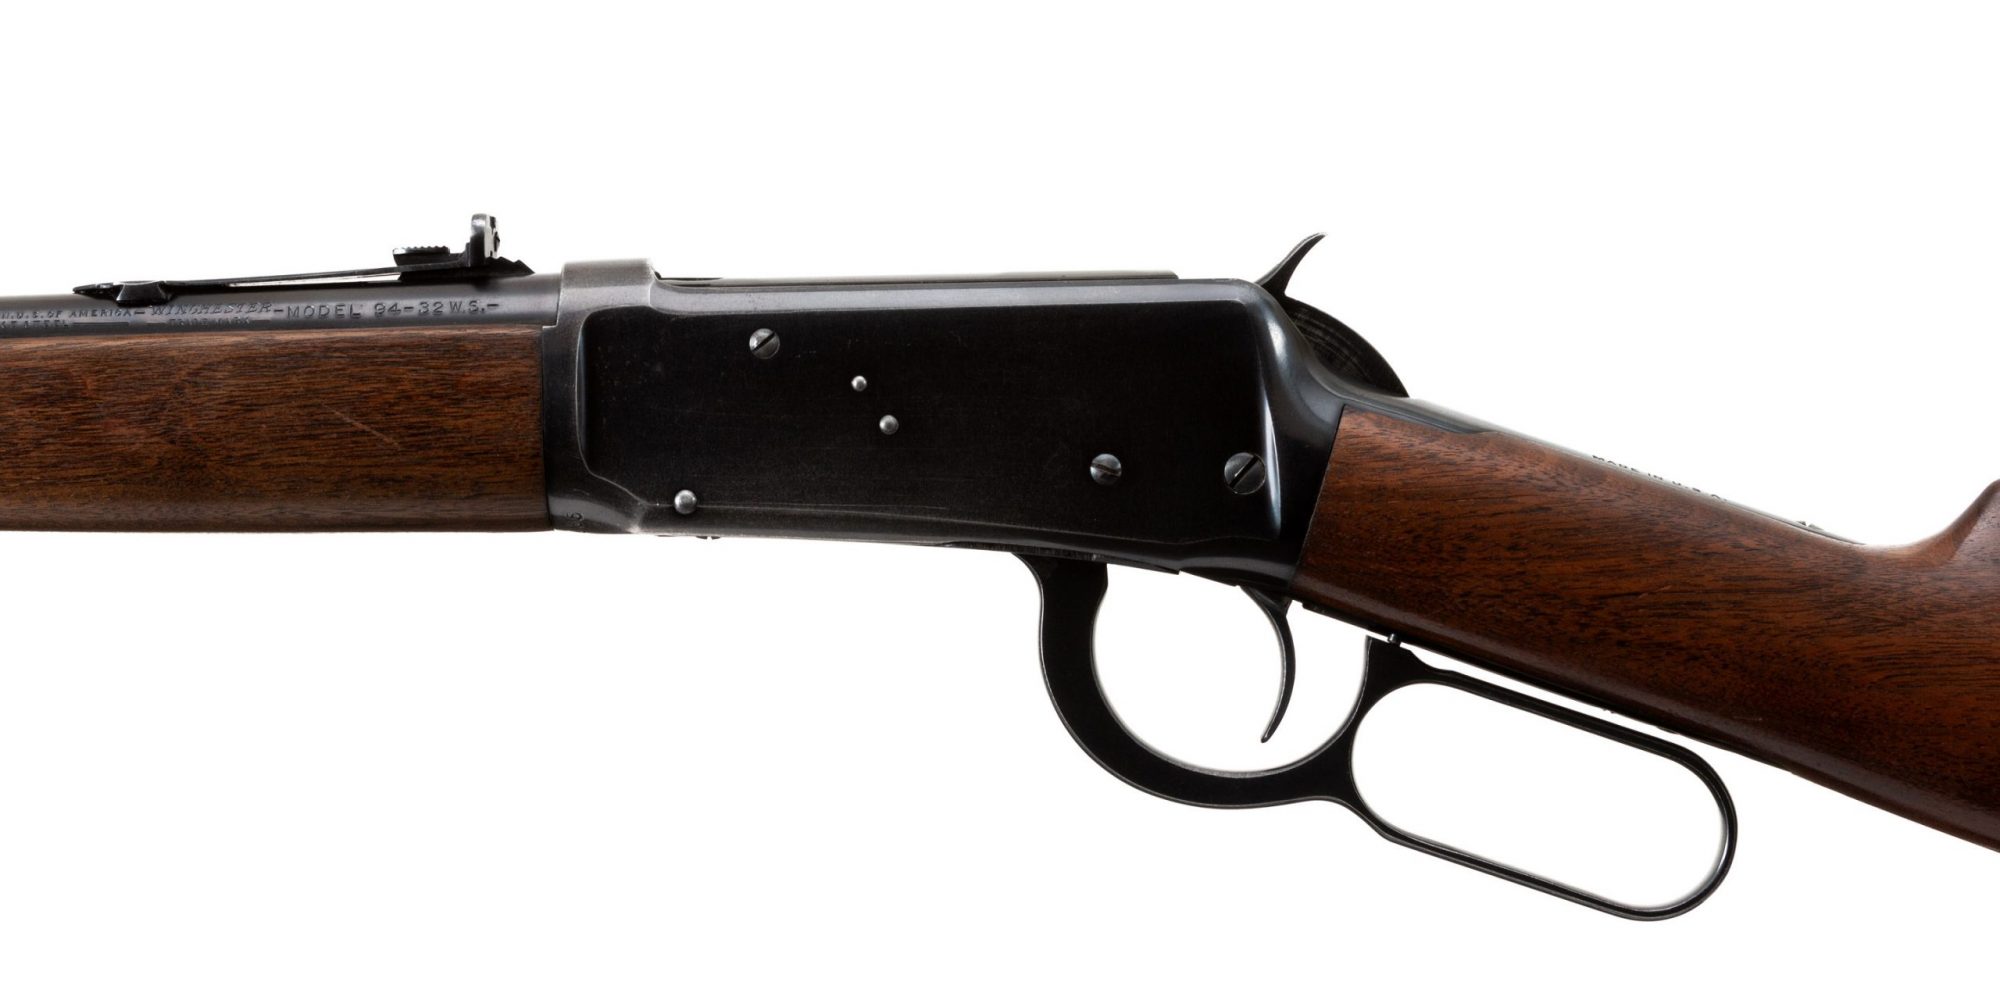 Photo of a pre-owned Winchester Model 94 Carbine from circa 1943-45, for sale by Turnbull Restoration of Bloomfield, NY